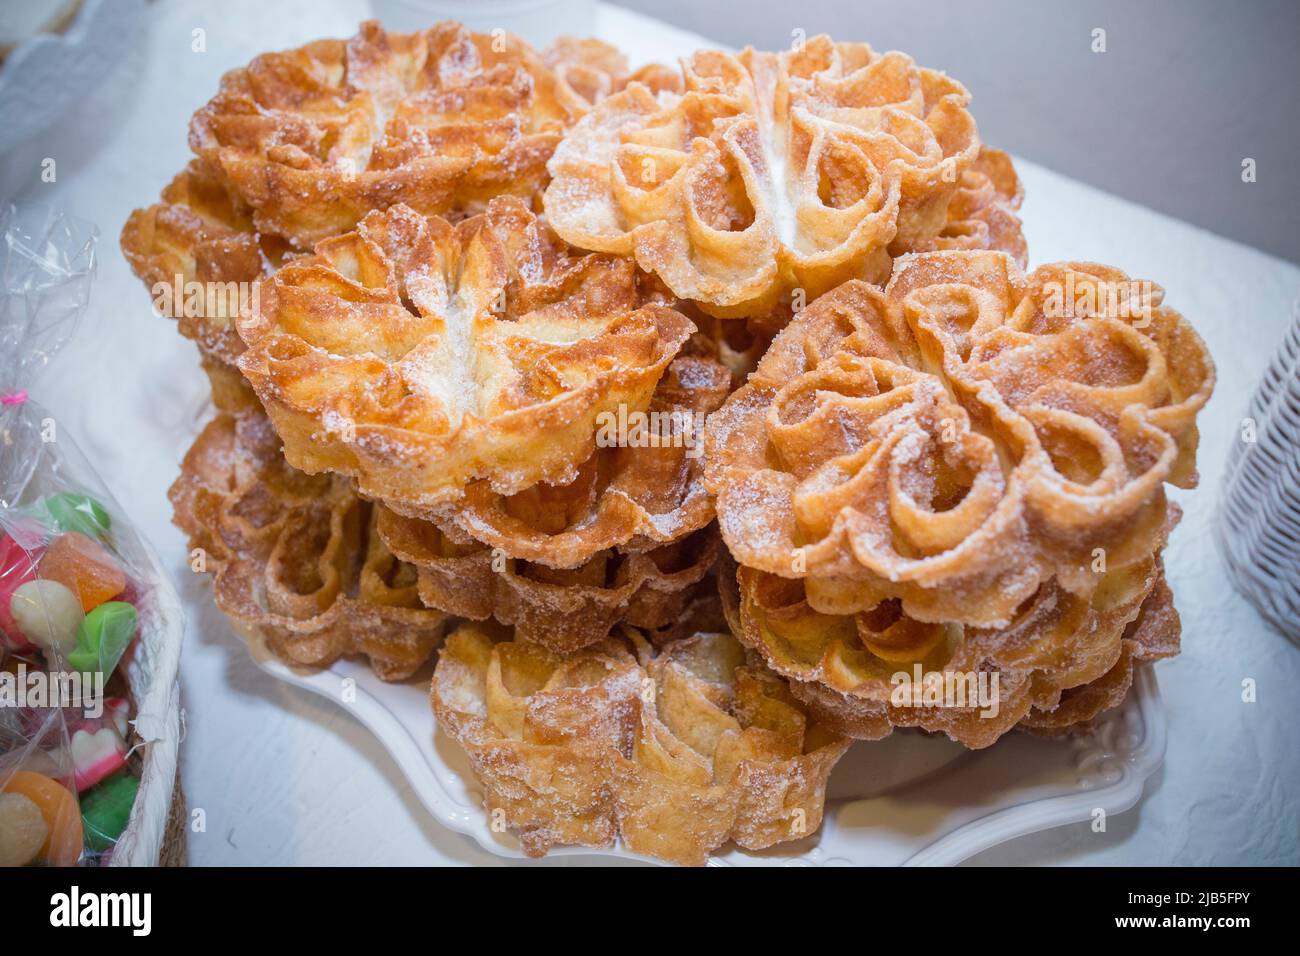 Platter full of traditional fried flores or flowers. Spanish fritter dusted with sugar. Stock Photo